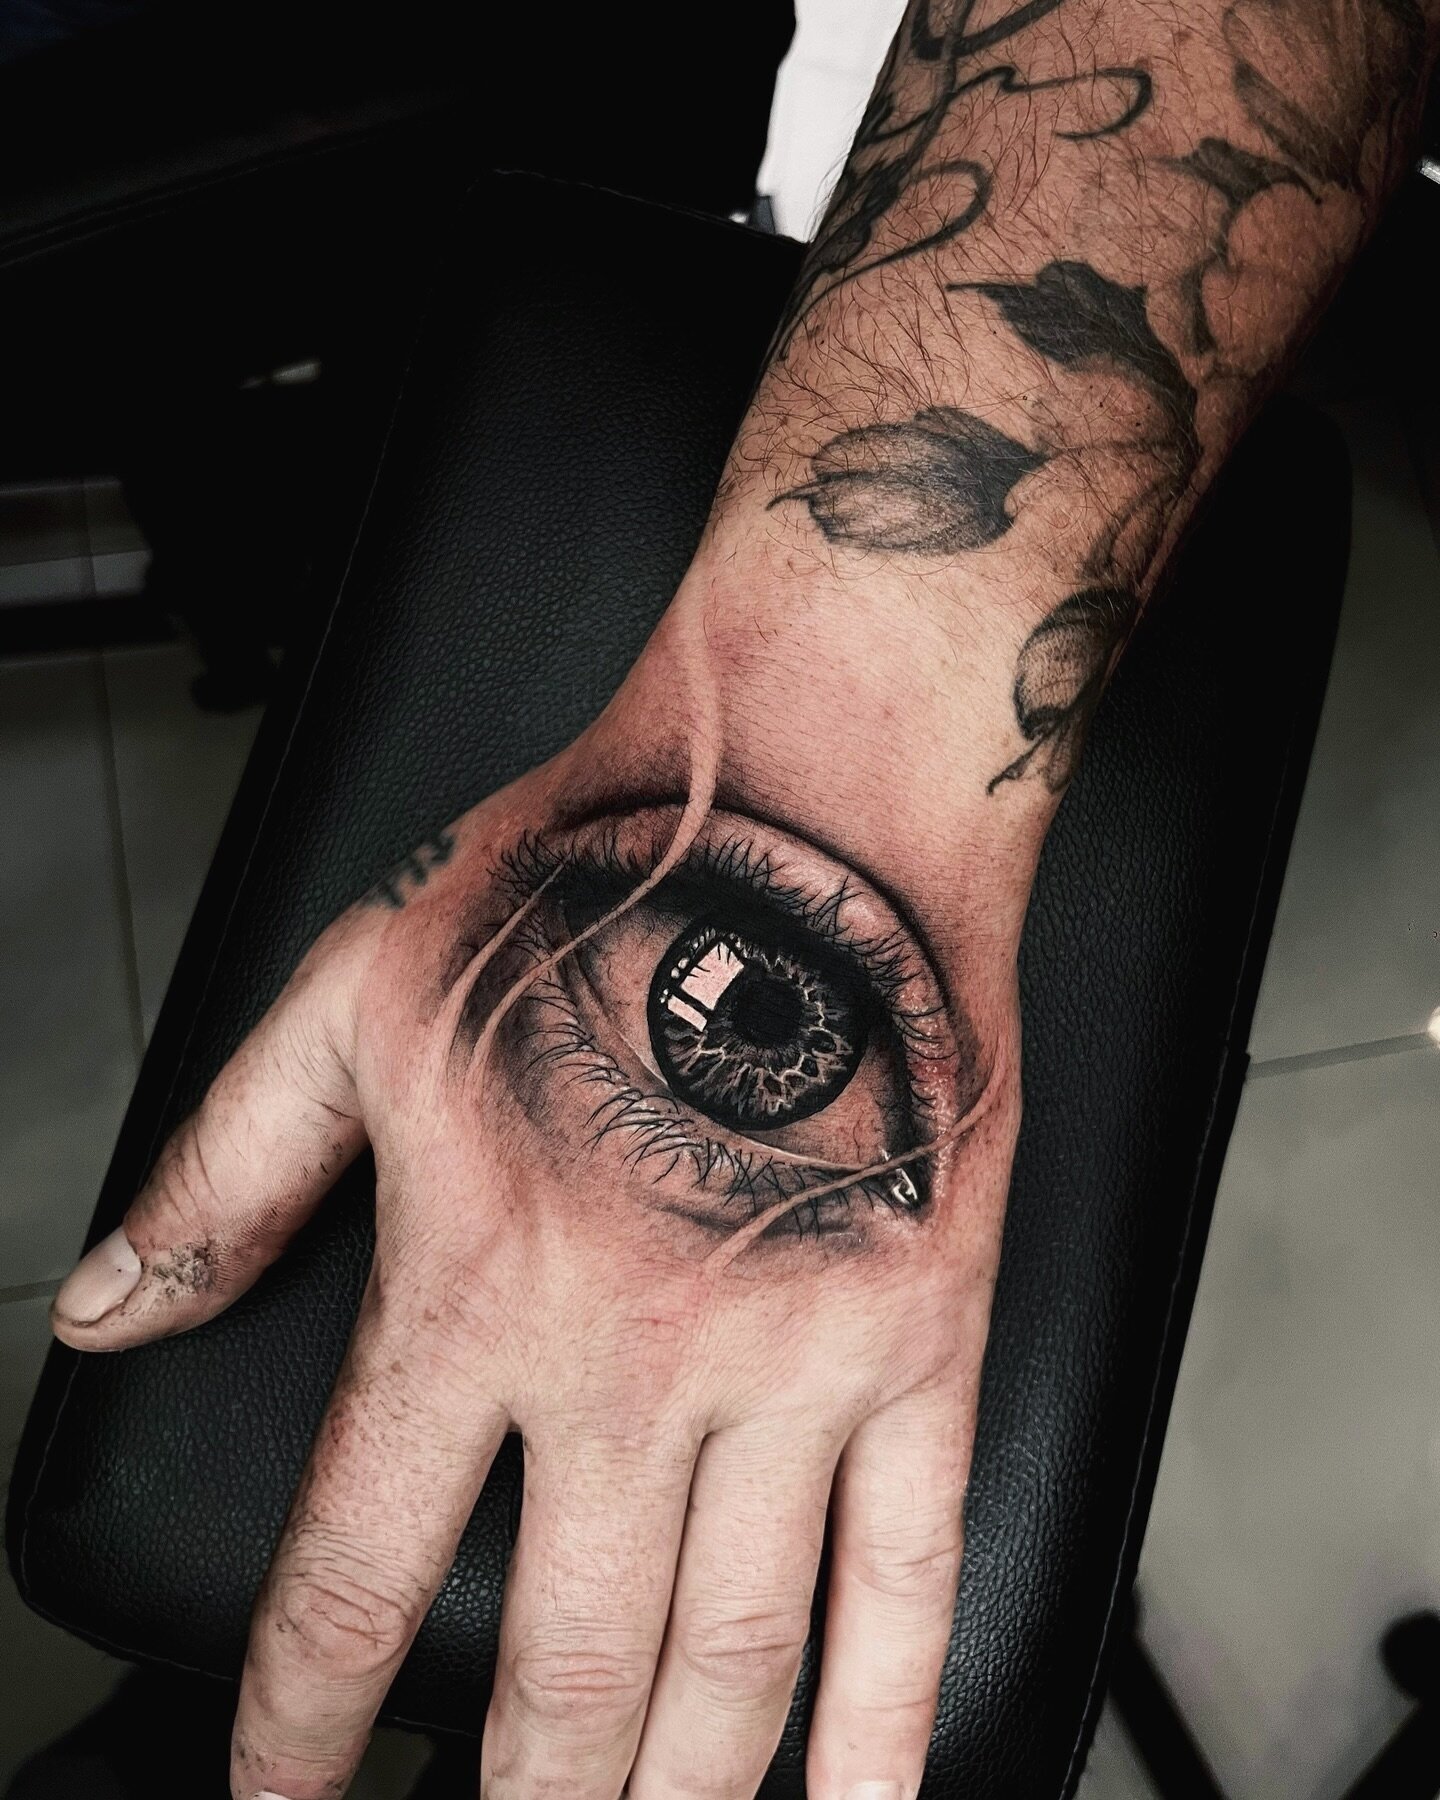 Eye can&rsquo;t get over how incredible this piece turned out 👀 Done by Manuel 🔥 | @manuelviola.tattoos 

#squiresink #goldcoast #2024 #surfersparadise #tattoo #tattooparlor #tattoostudio #ink #inked @pirattattoo #pirattattoomachine #tattooartist #